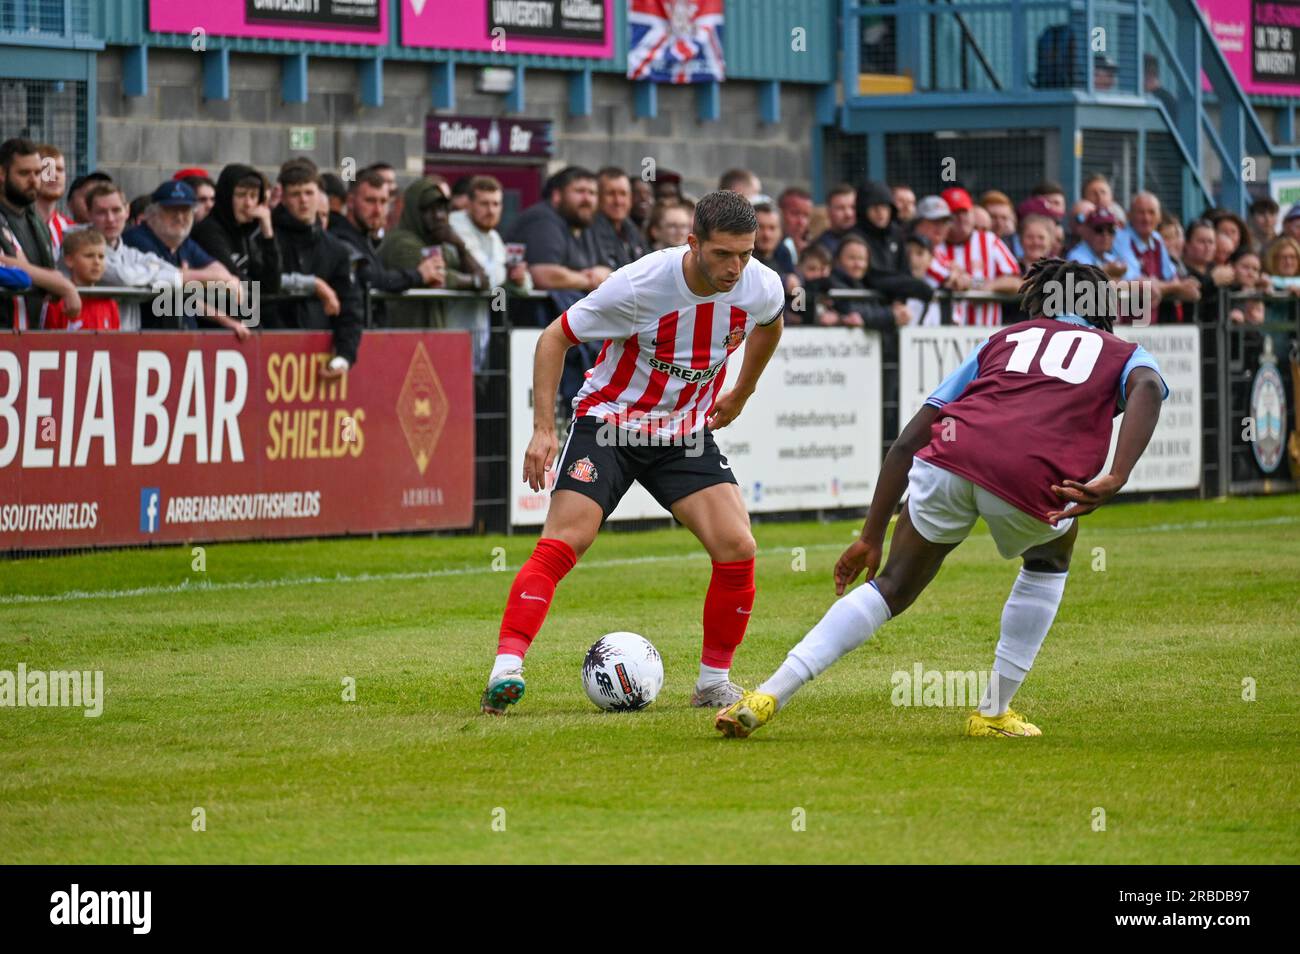 Sunderland AFC's Lynden Gooch in action against South Shields FC. Stock Photo